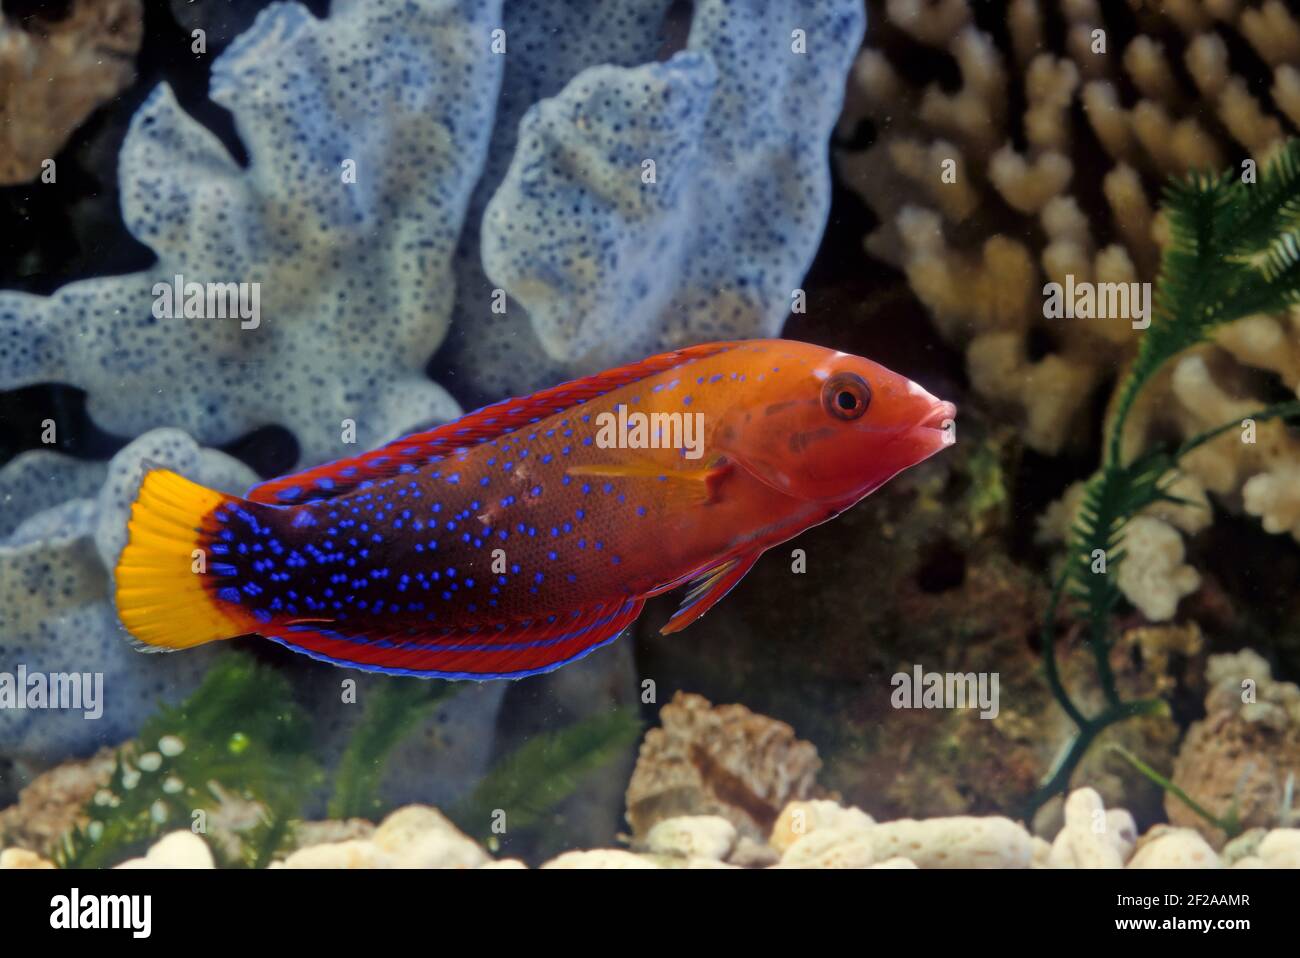 Coris gaimard, the yellowtail wrasse or African coris, among other vernacular names, is a species of wrasse native to the tropical waters of the centr Stock Photo